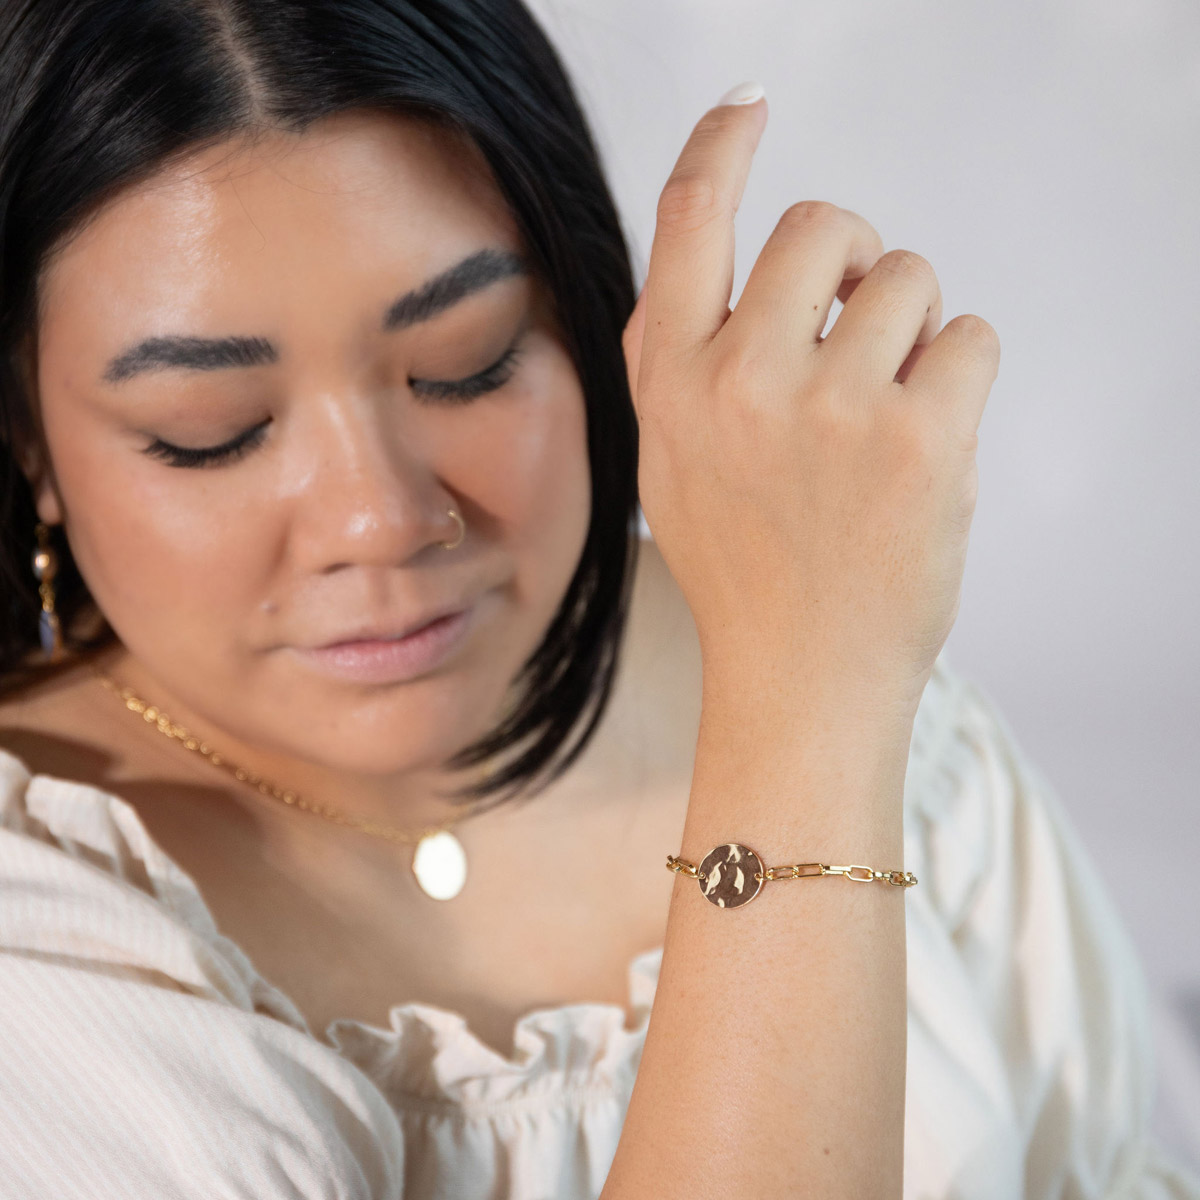 Woman in a tan blouse modeling the Meridian Bracelet, a hammered gold oval charm on a thick paperclip chain.